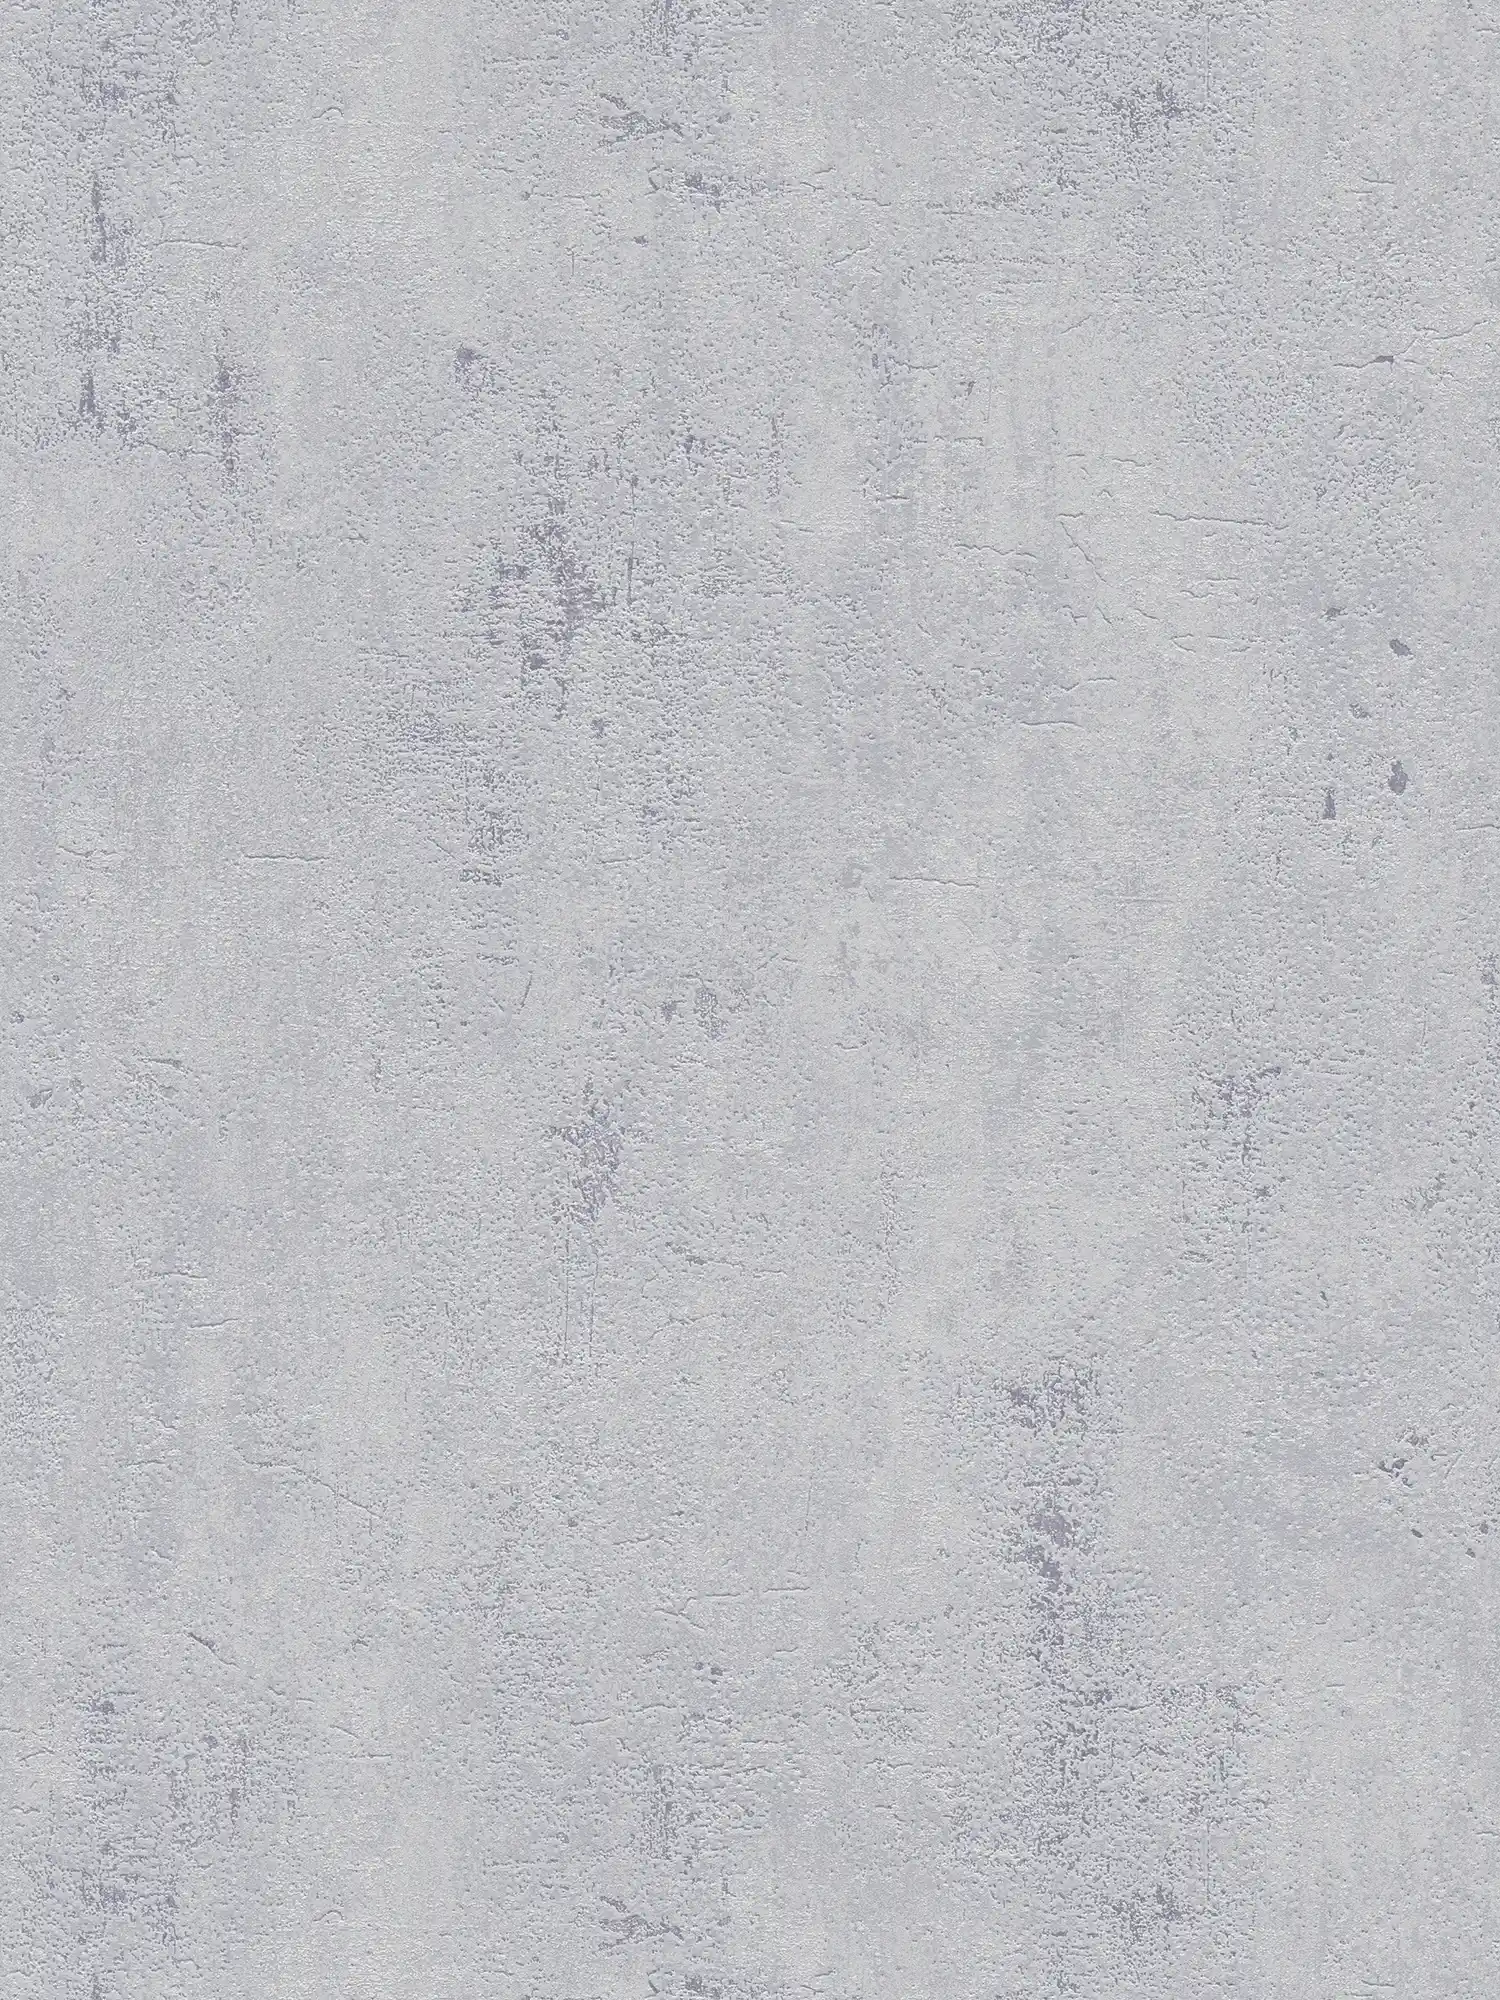 Plain wallpaper with concrete look in rustic design - grey
